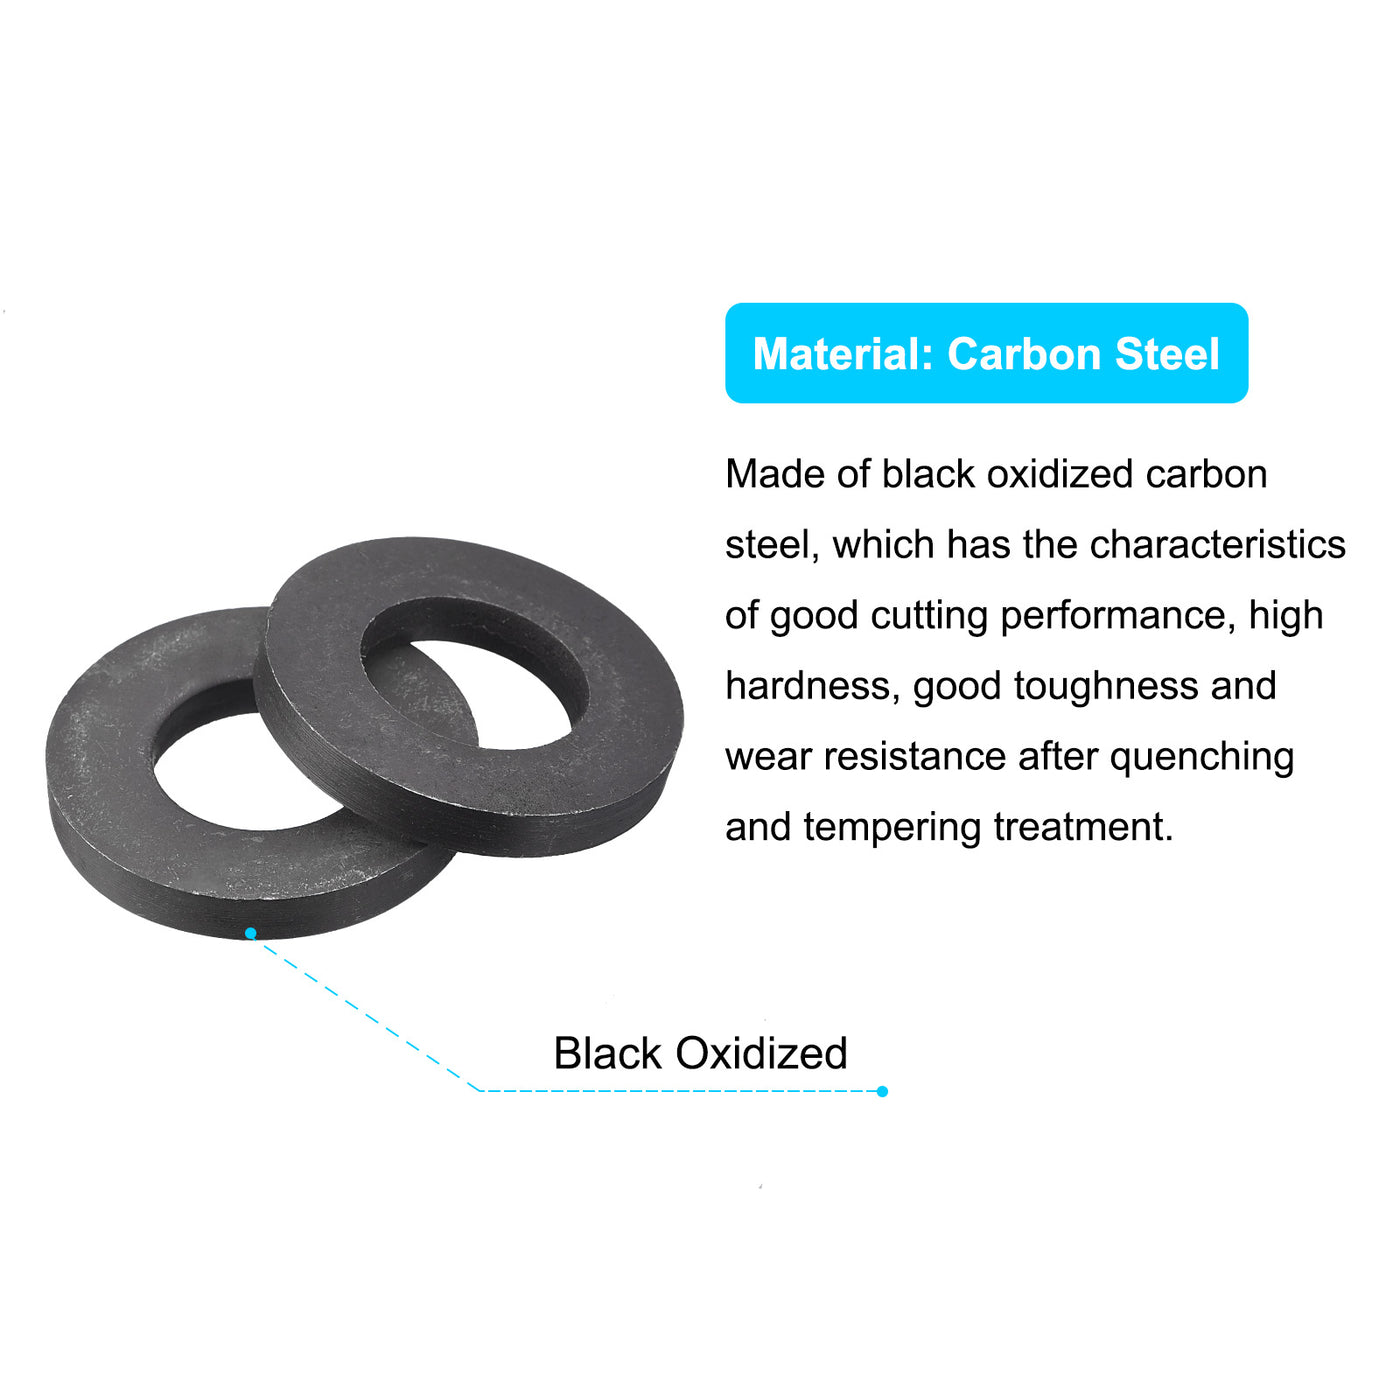 uxcell Uxcell M20 Carbon Steel Flat Washer 2pcs 20.5x40x6mm Grade 8.8 Alloy Steel Fasteners